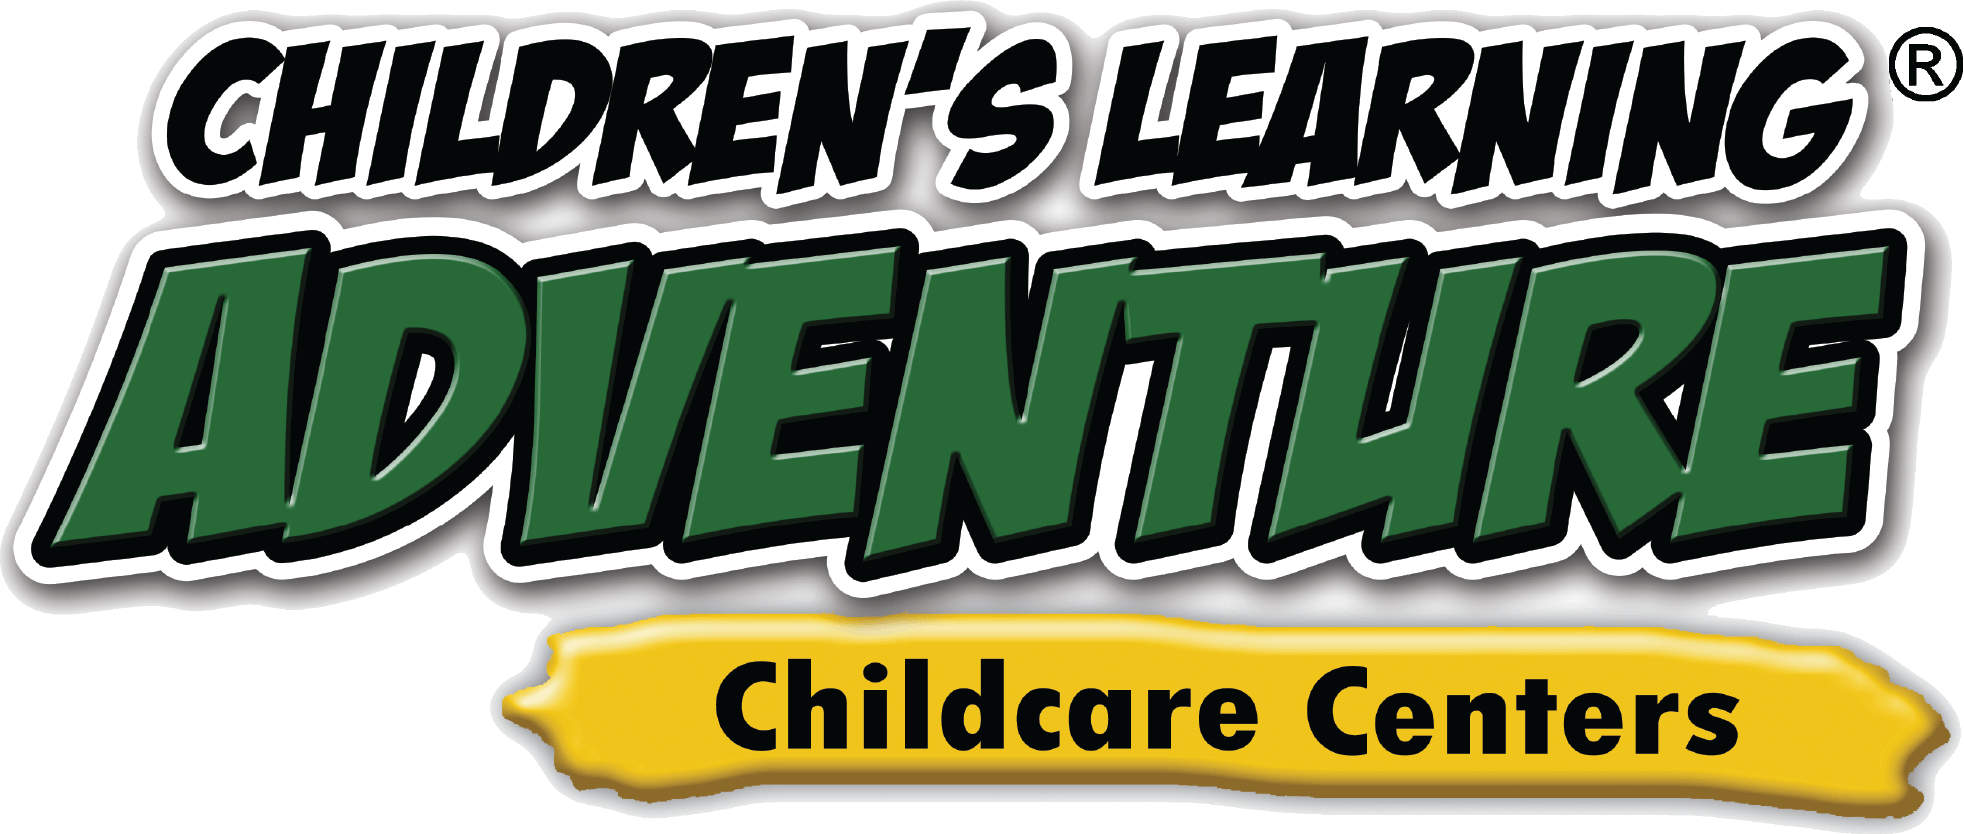 New child care service opens in Four Points - Four Points News